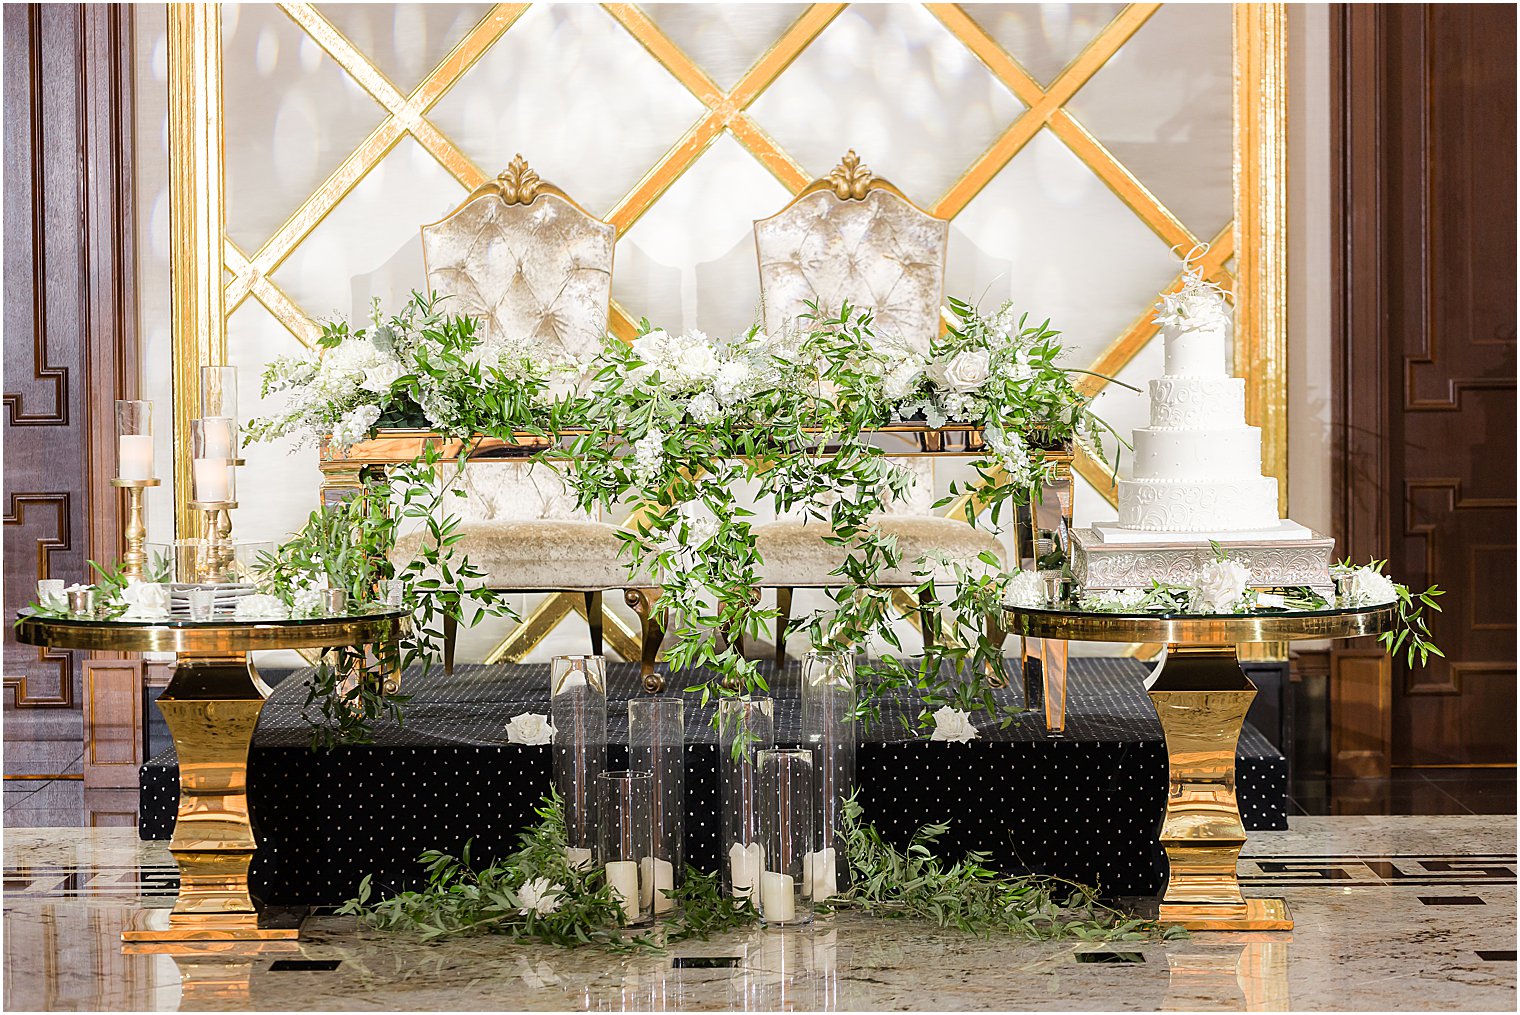 sweetheart table with greenery draped around front